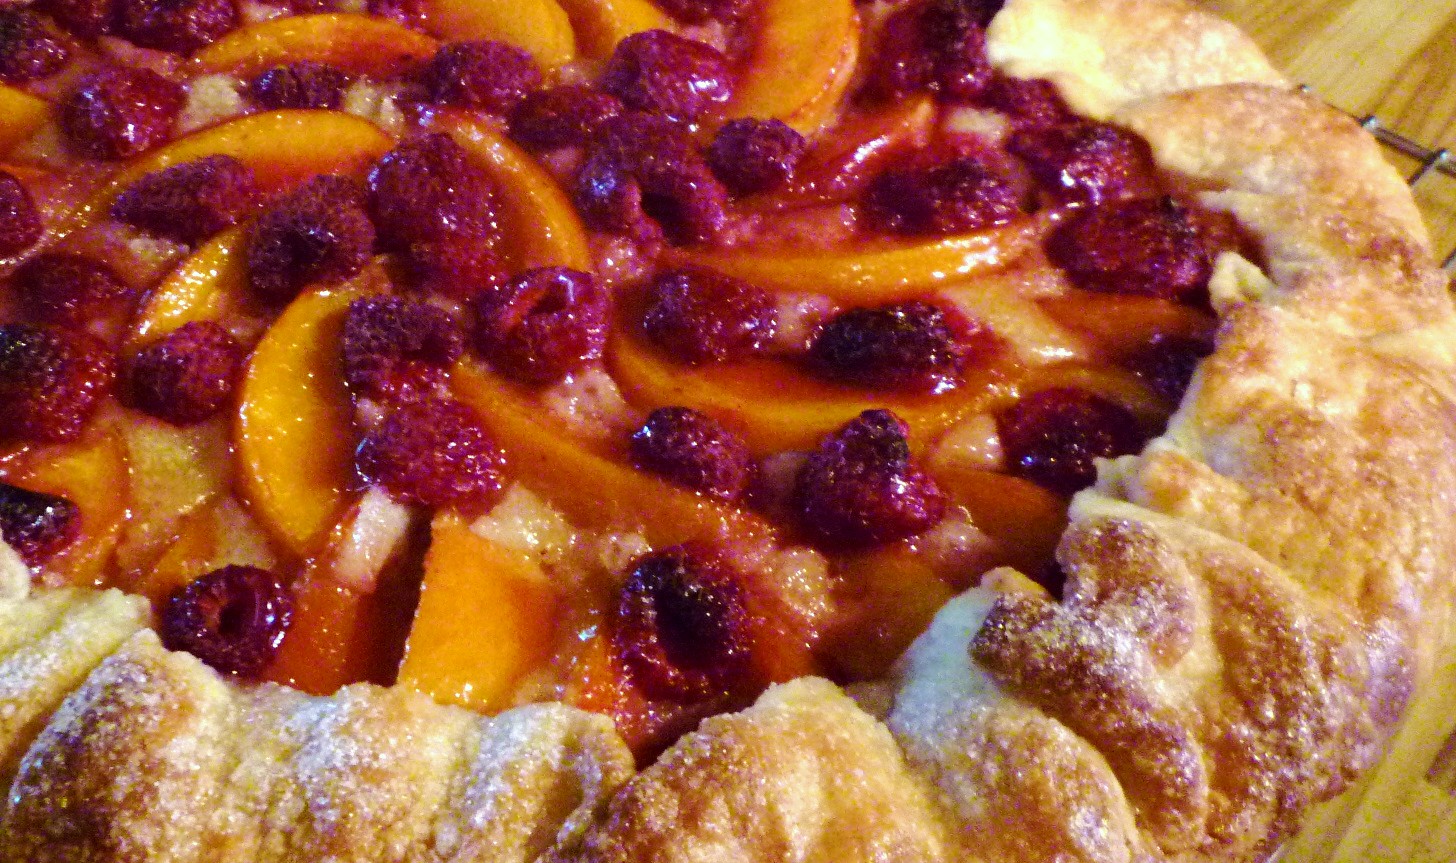 For Love of the Table Peach, Raspberry & Almond Galette